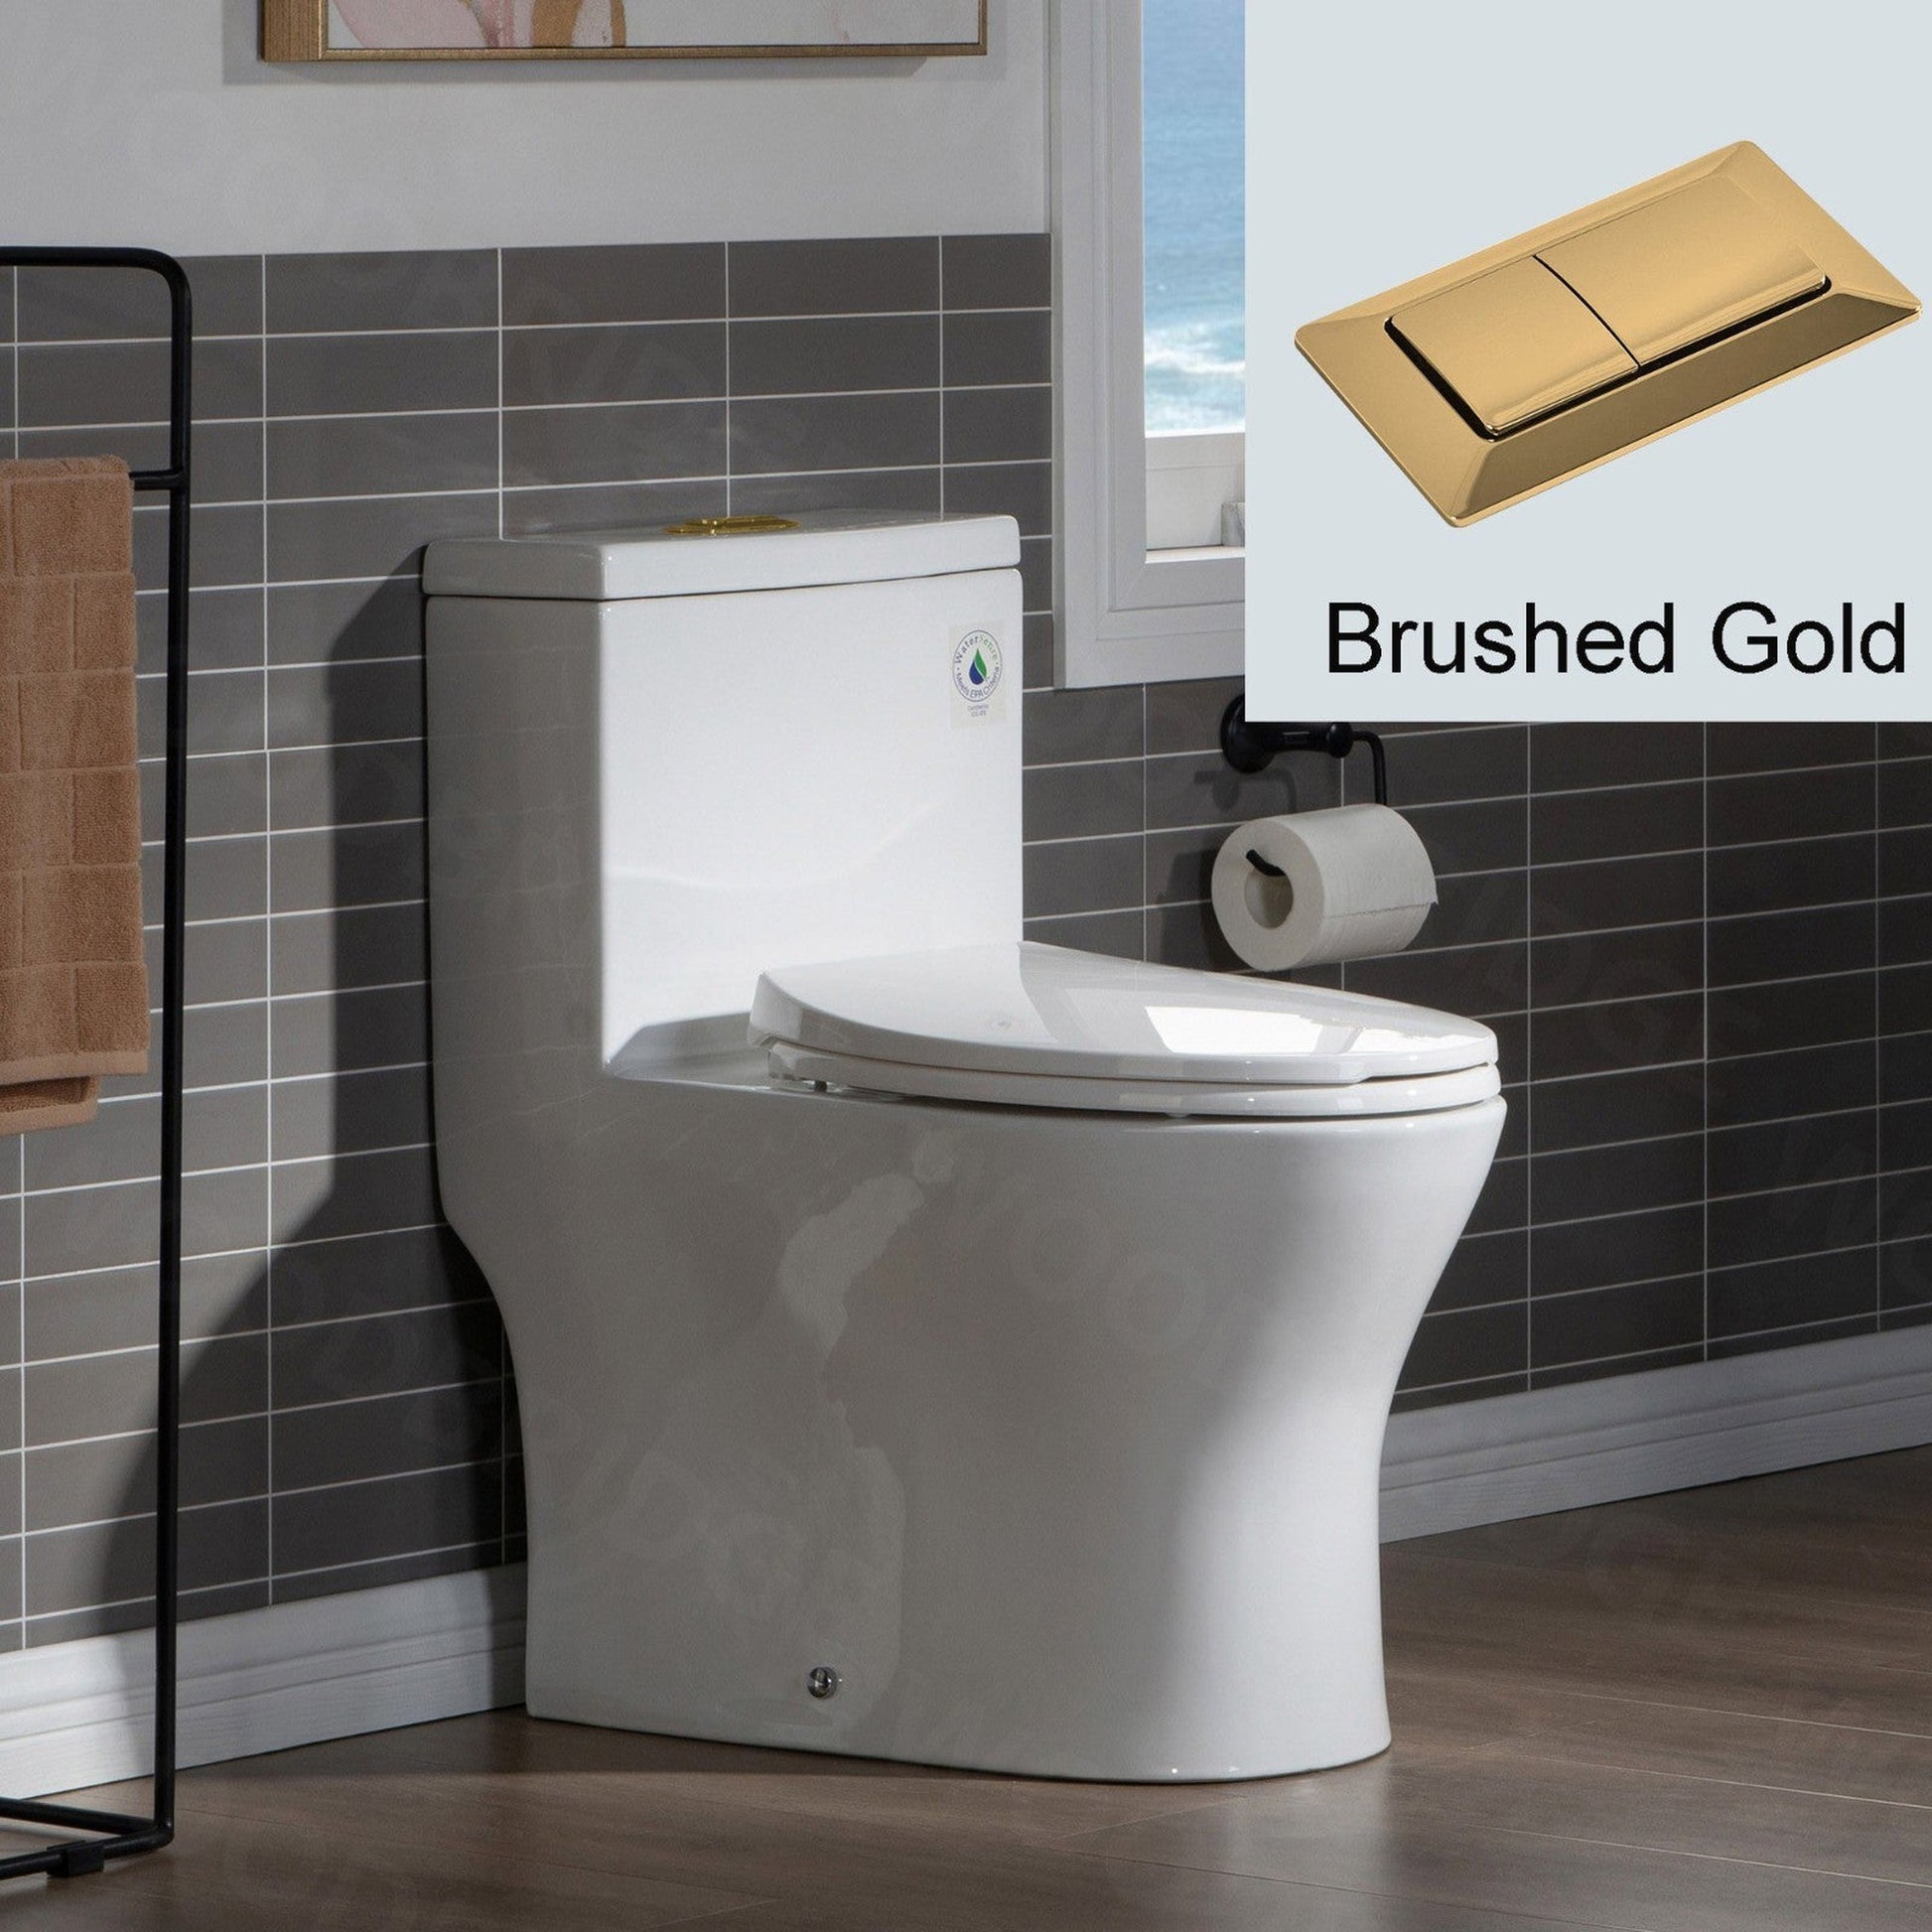 WoodBridge T0032-BG White Modern One Piece Dual Flush 1.28 GP Toilet With Soft Closing Seat and Brushed Gold Button